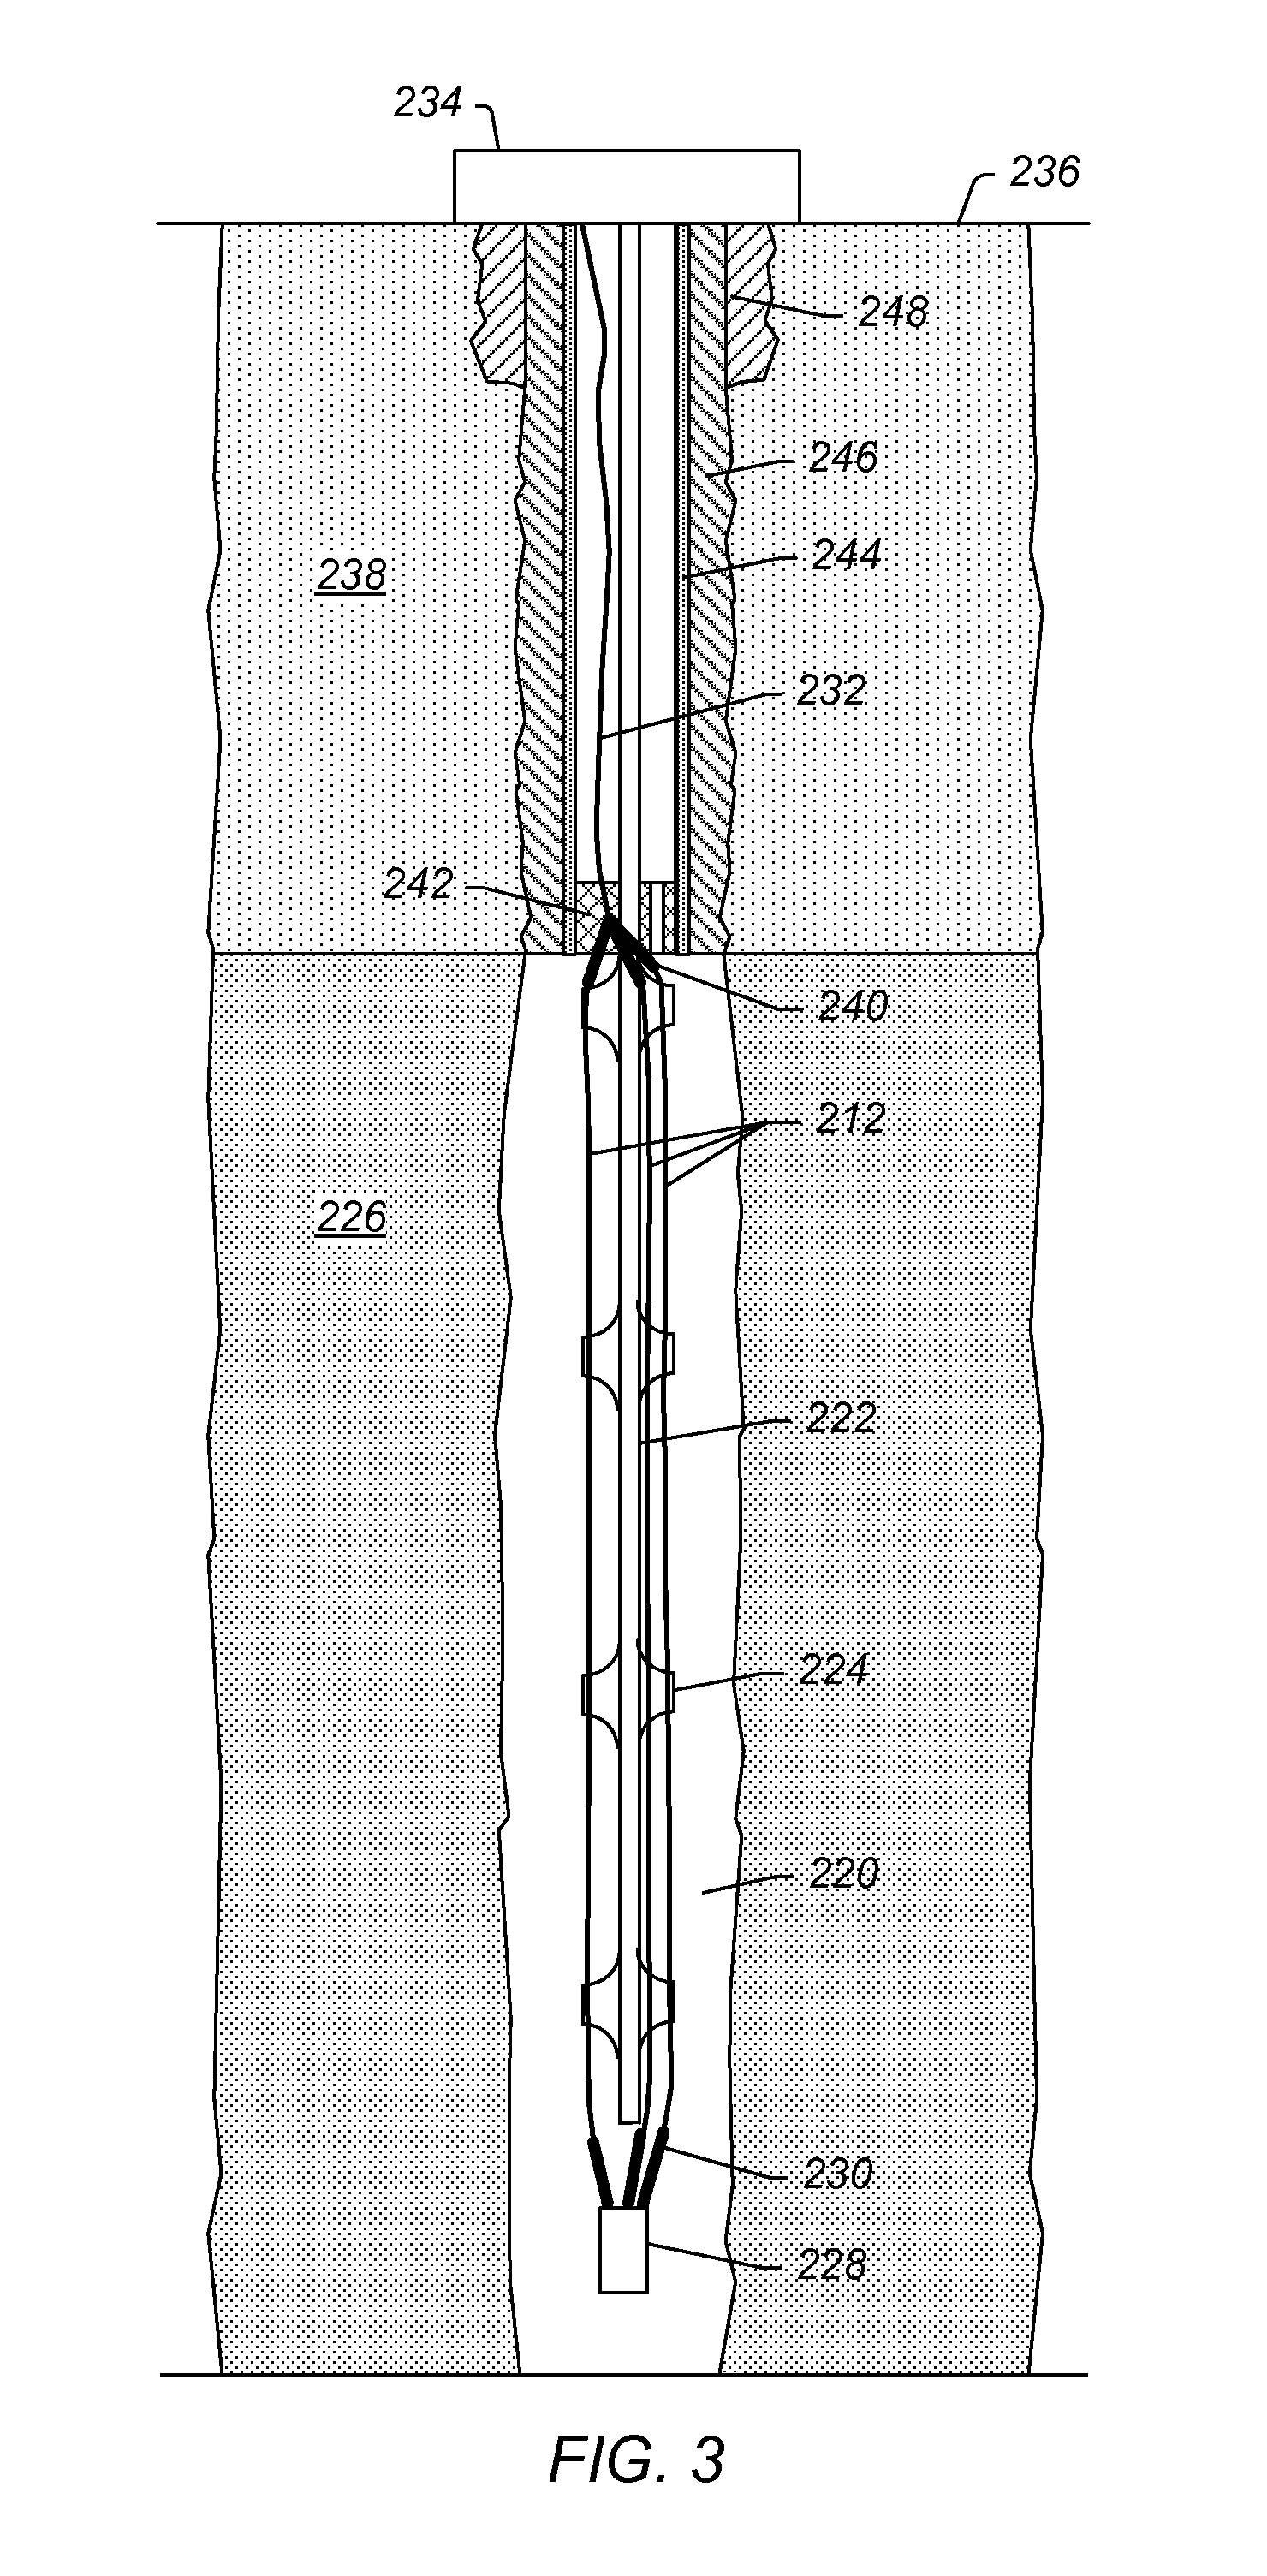 Mechanical compaction of insulator for insulated conductor splices